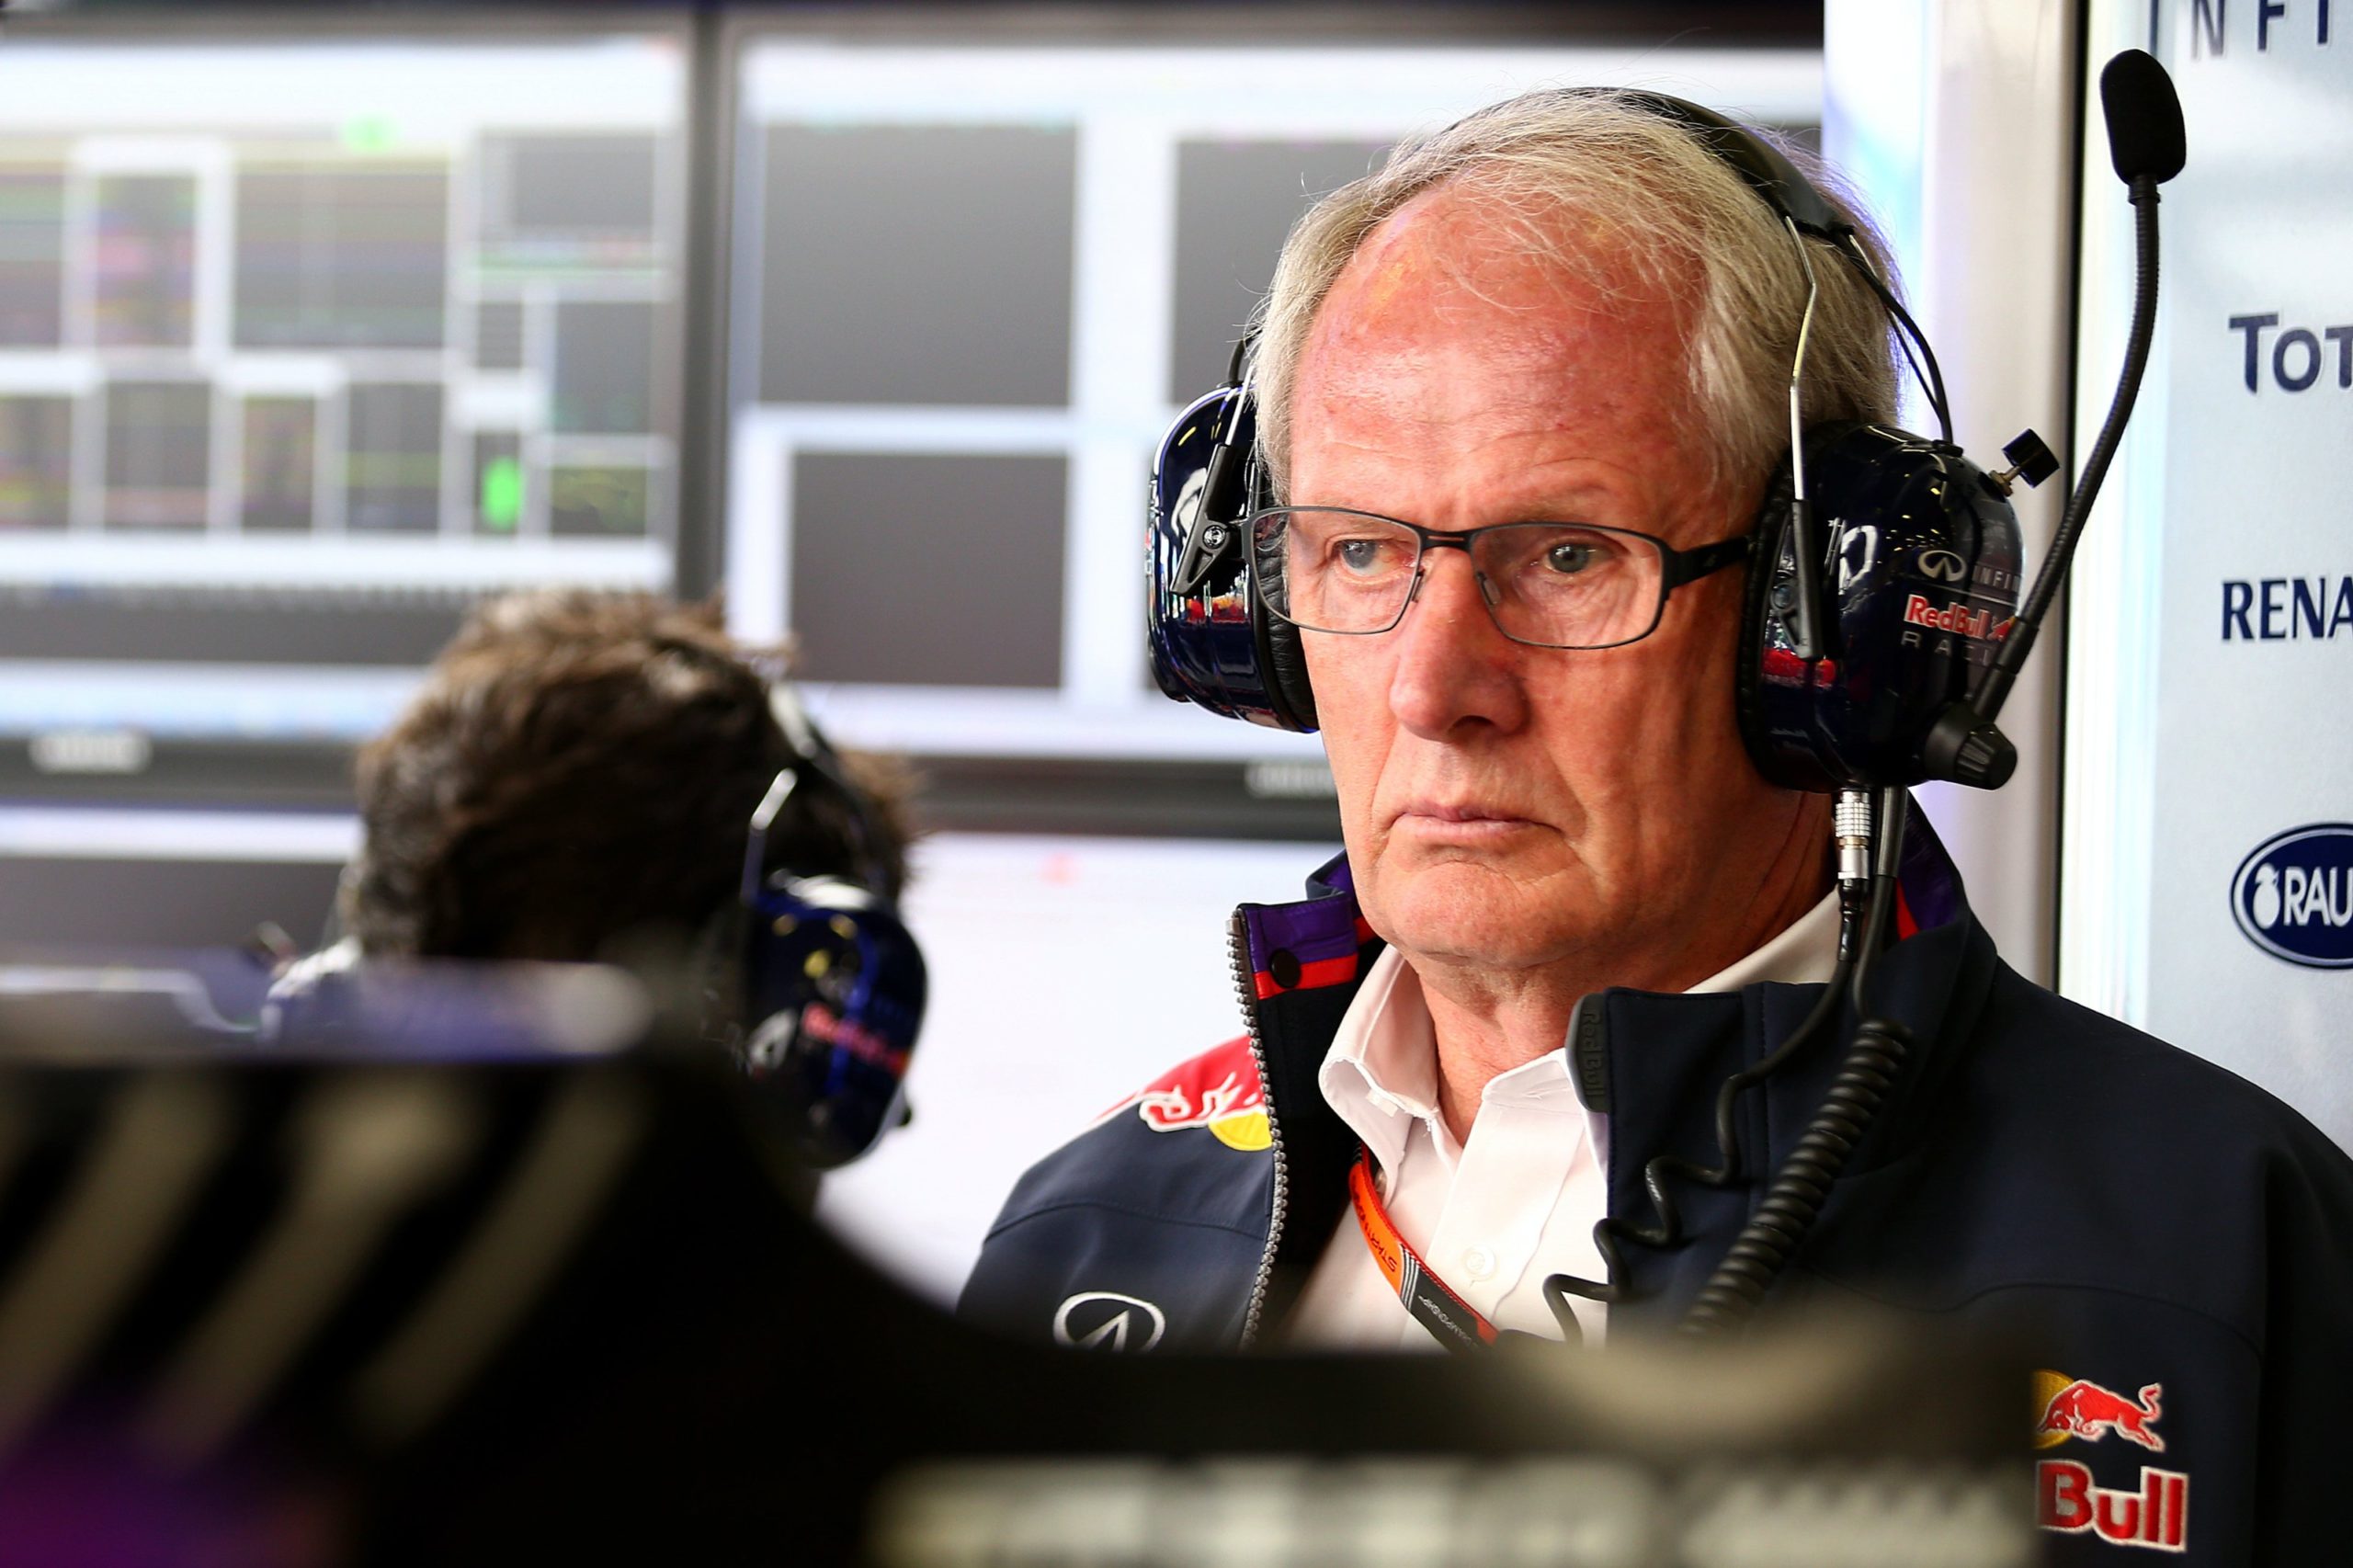 Who is Dr Helmut Marko? What does he do at Redbull?